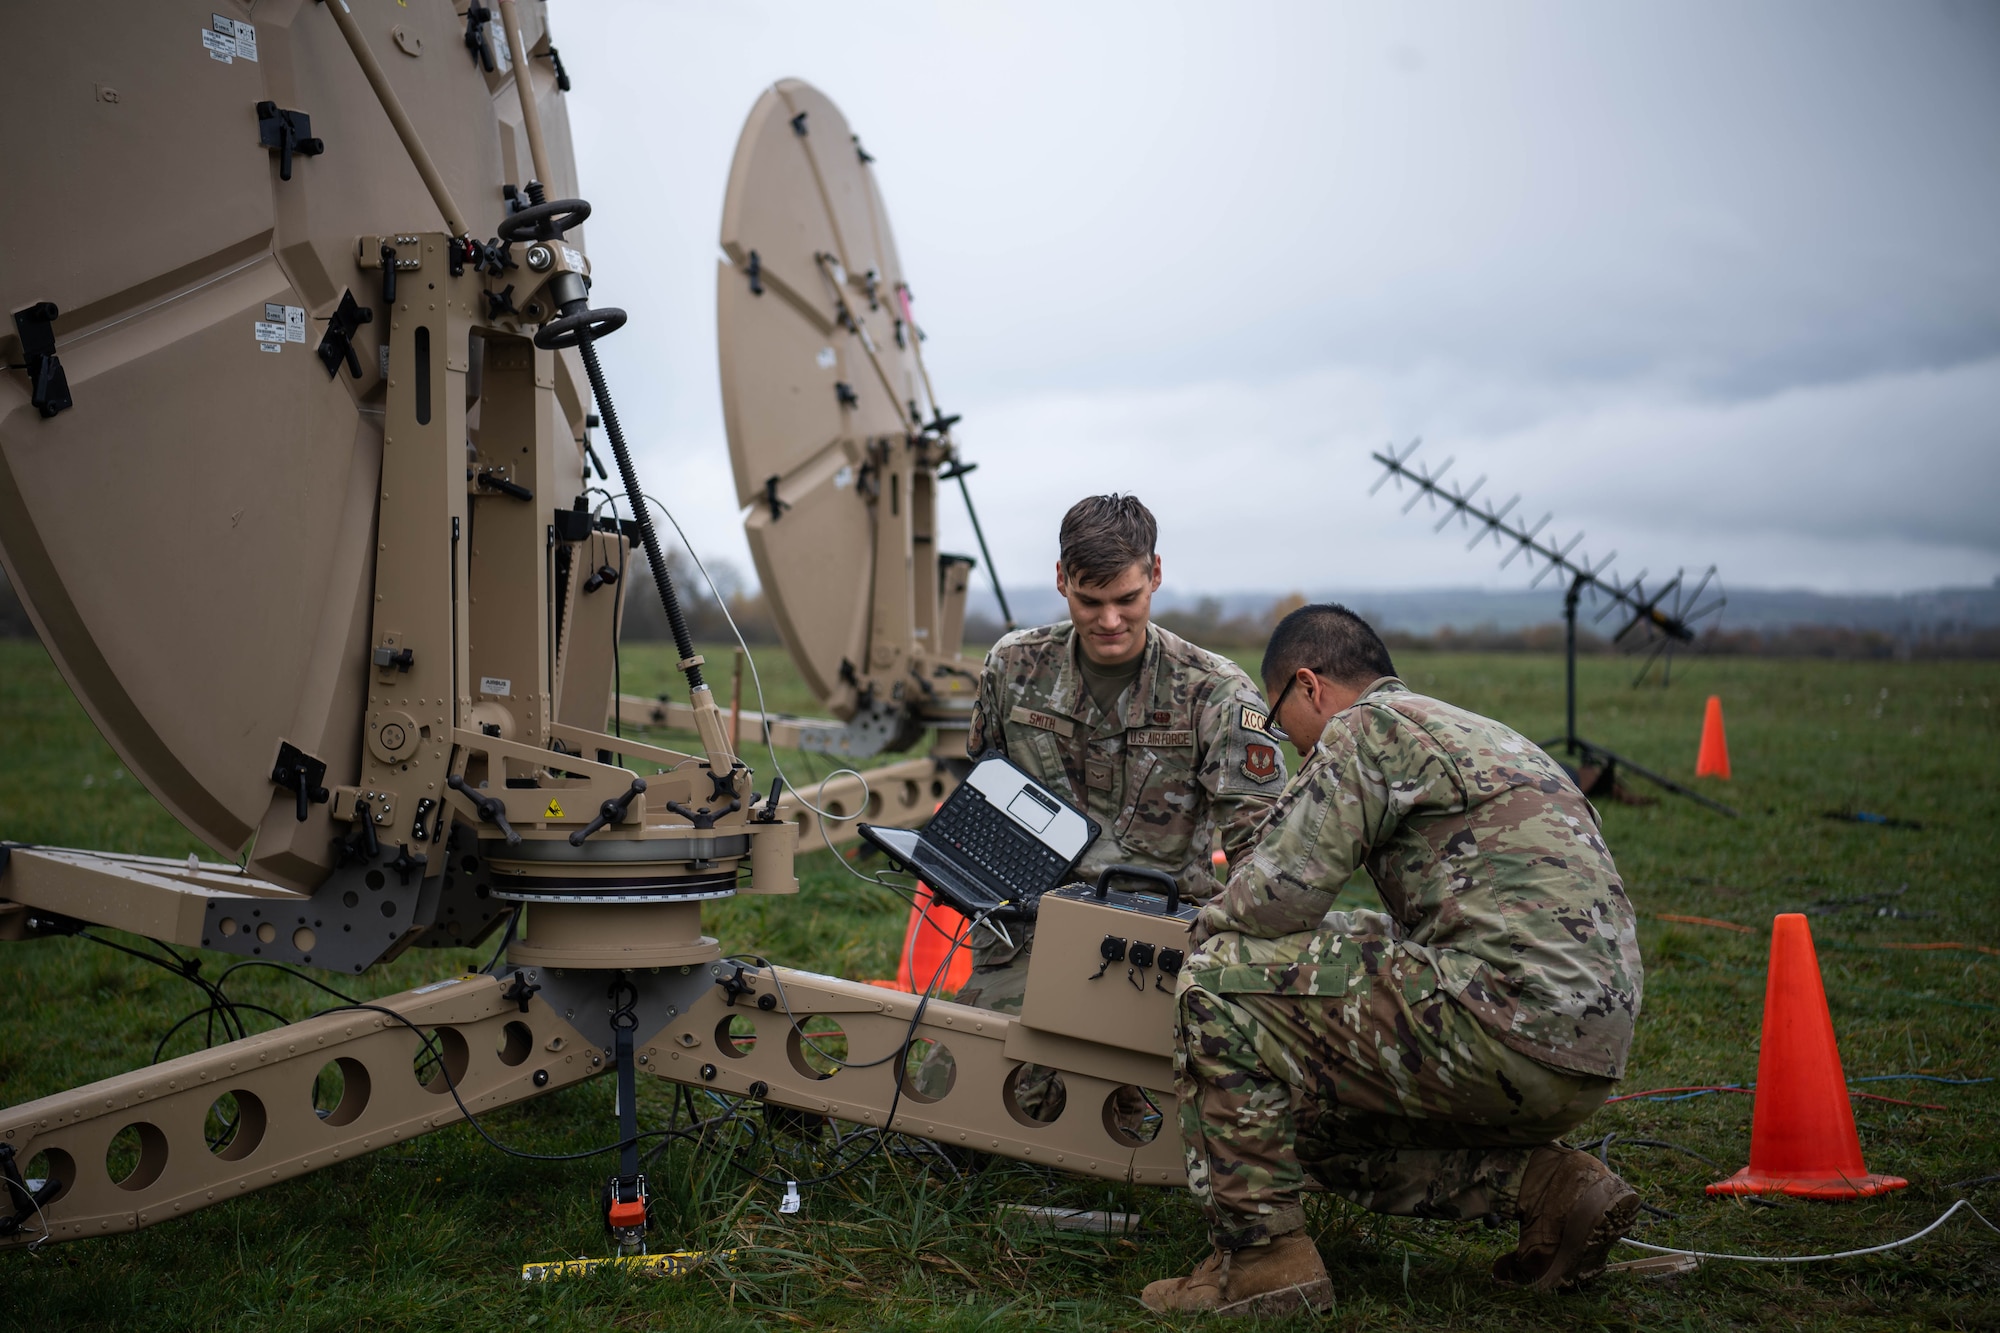 U.S. Air Force Airman 1st Class Ryan Smith, left, and Airman 1st Class Yekun Yang, right, 1st Combat Communications Squadron radio frequency transmissions system technicians, check cable connections on a satellite dish during exercise HEAVY RAIN 23, at Grostenquin, France, Nov. 16, 2023. HEAVY RAIN is a U.S. Air Forces in Europe-led command and control exercise that integrates communicators, operators and aggressors from joint forces, NATO allies and partners, testing and evaluating their communication and data-sharing capabilities in a rapidly changing operating environment. (U.S. Air Force photo by Senior Airman Jared Lovett)